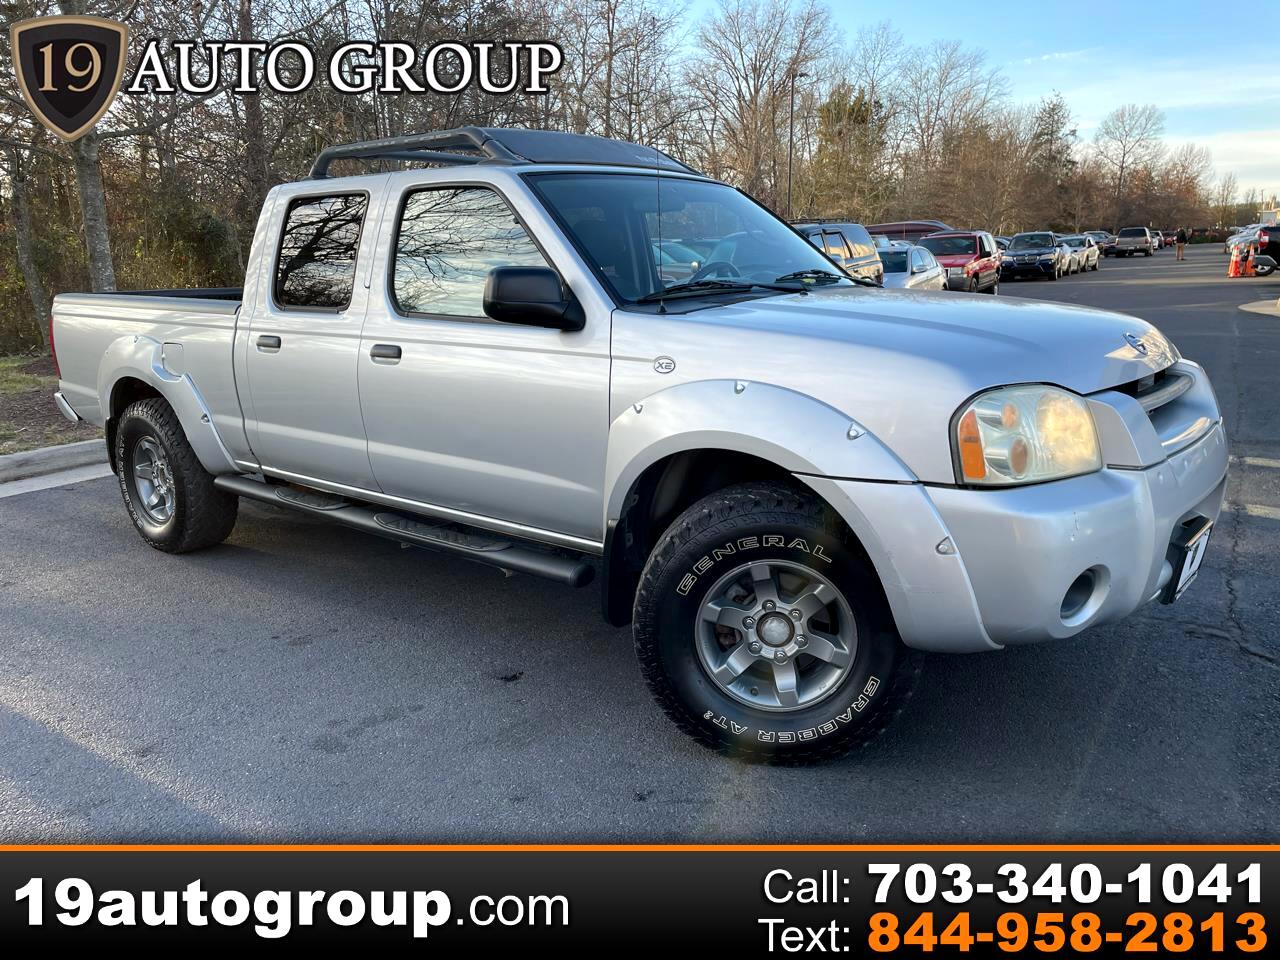 Nissan Frontier XE-V6 Crew Cab Long Bed 2WD 2004